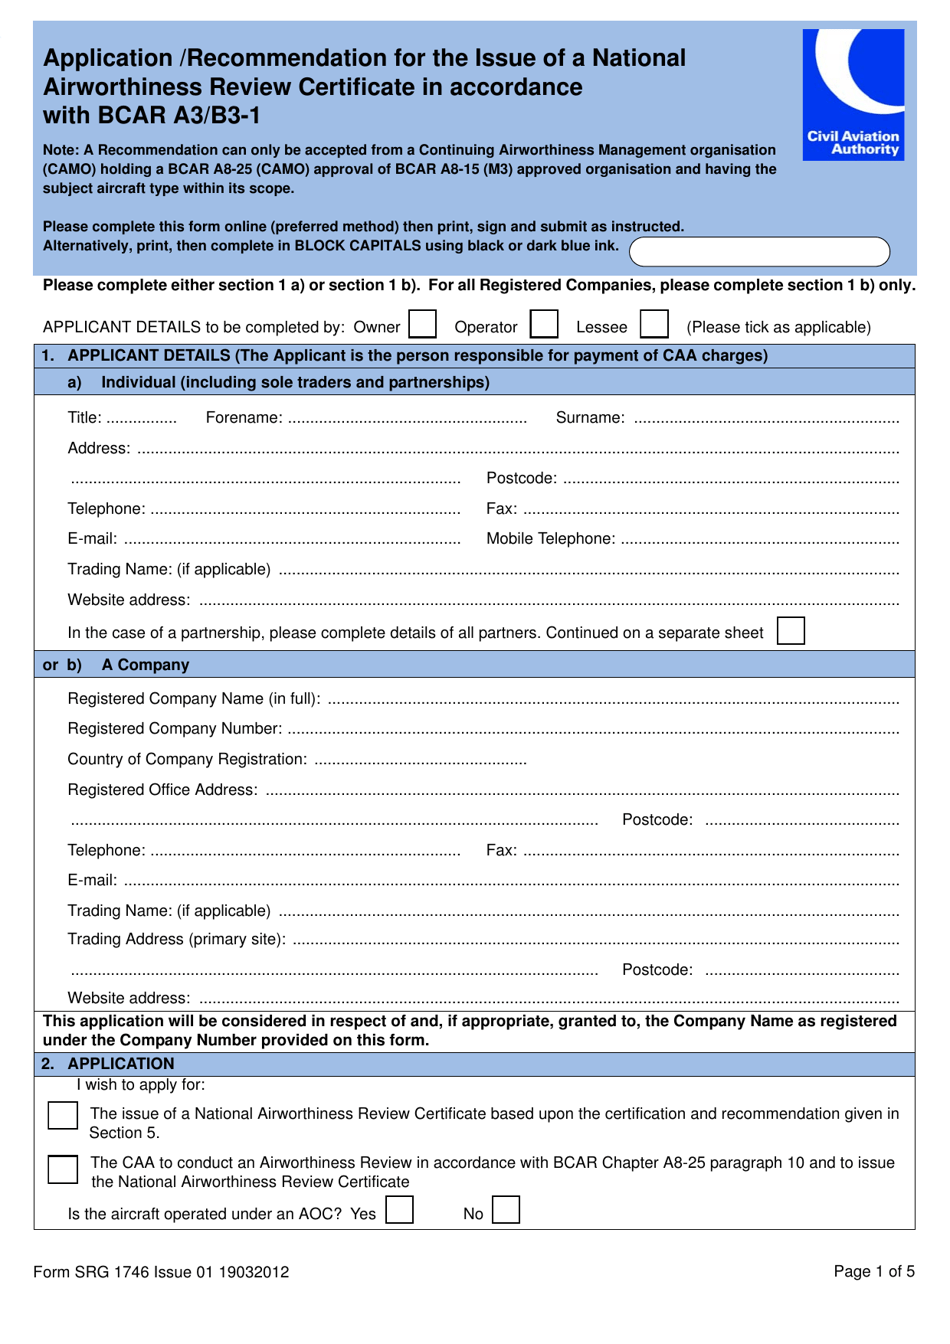 Form SRG1746 Application / Recommendation for the Issue of a National Airworthiness Review Certificate in Accordance With Bcar A3 / B3-1 - United Kingdom, Page 1